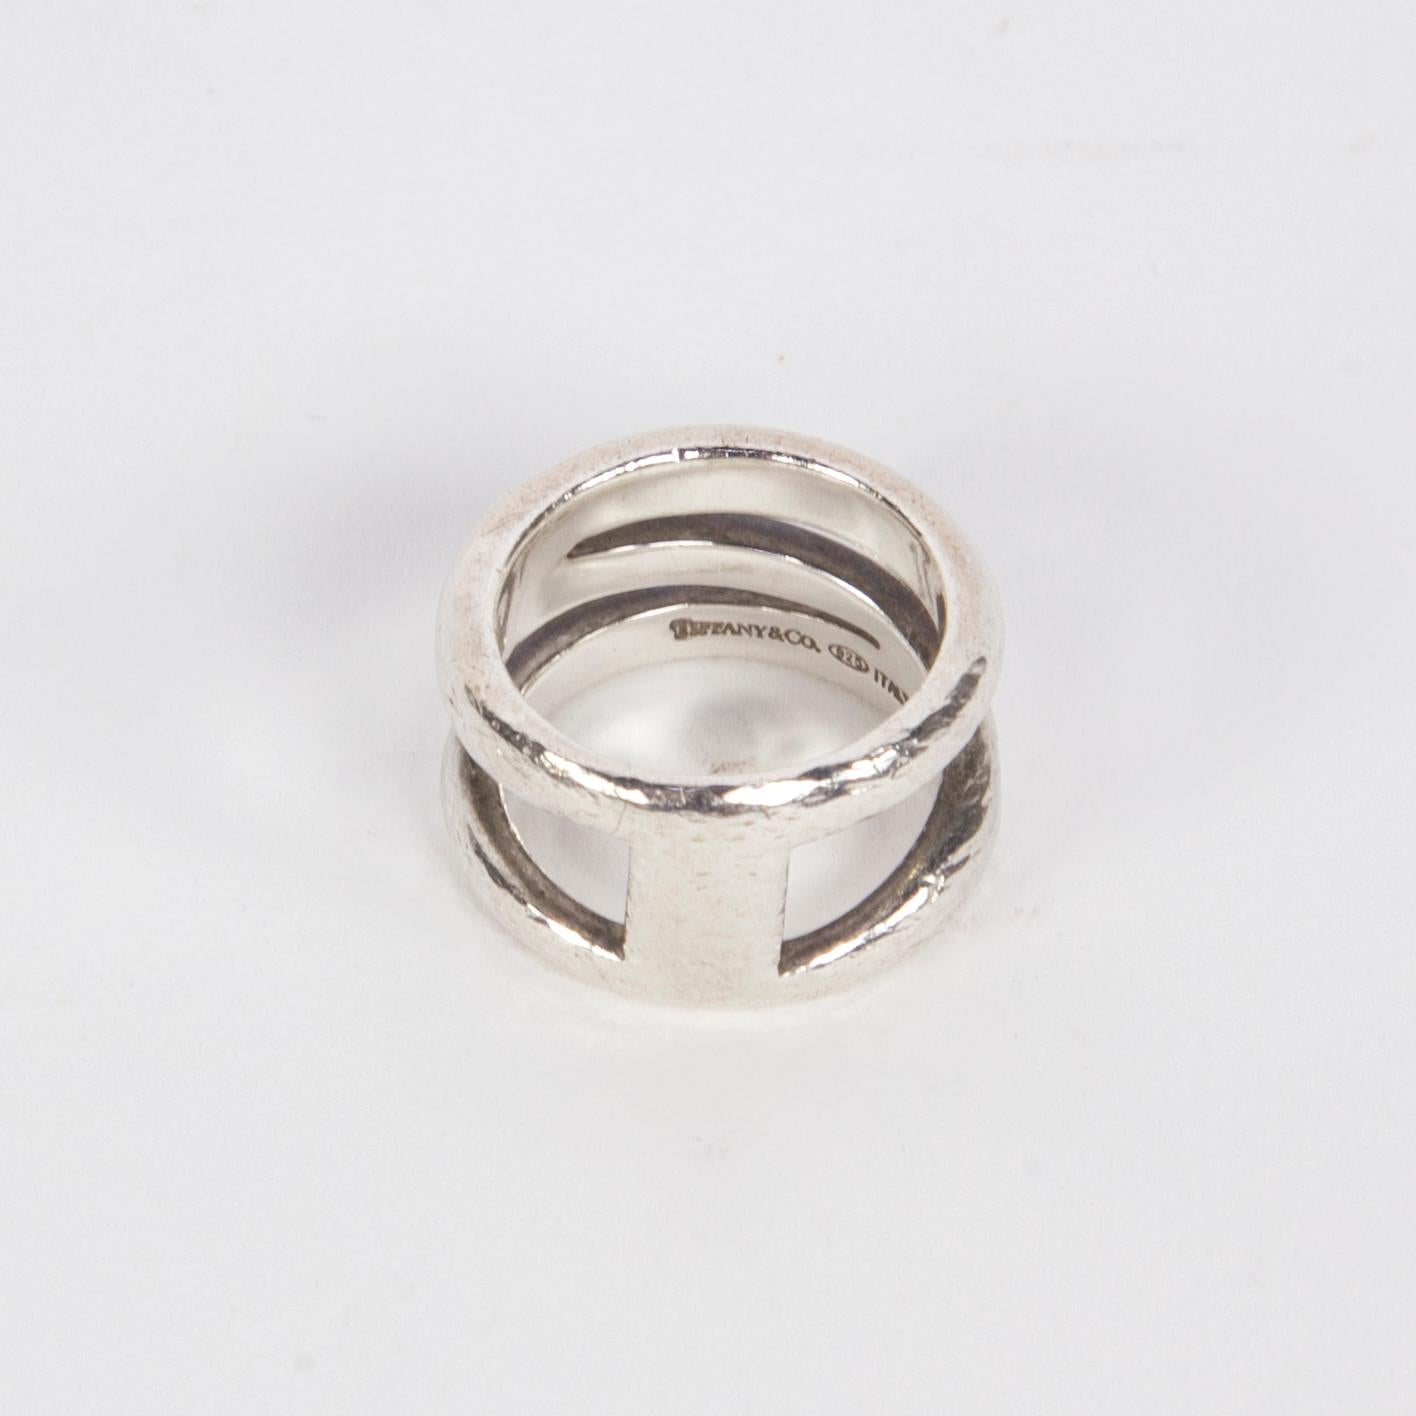 Tiffany & Co. Hand hammered Sterling Silver Band Ring; Hallmarked:  